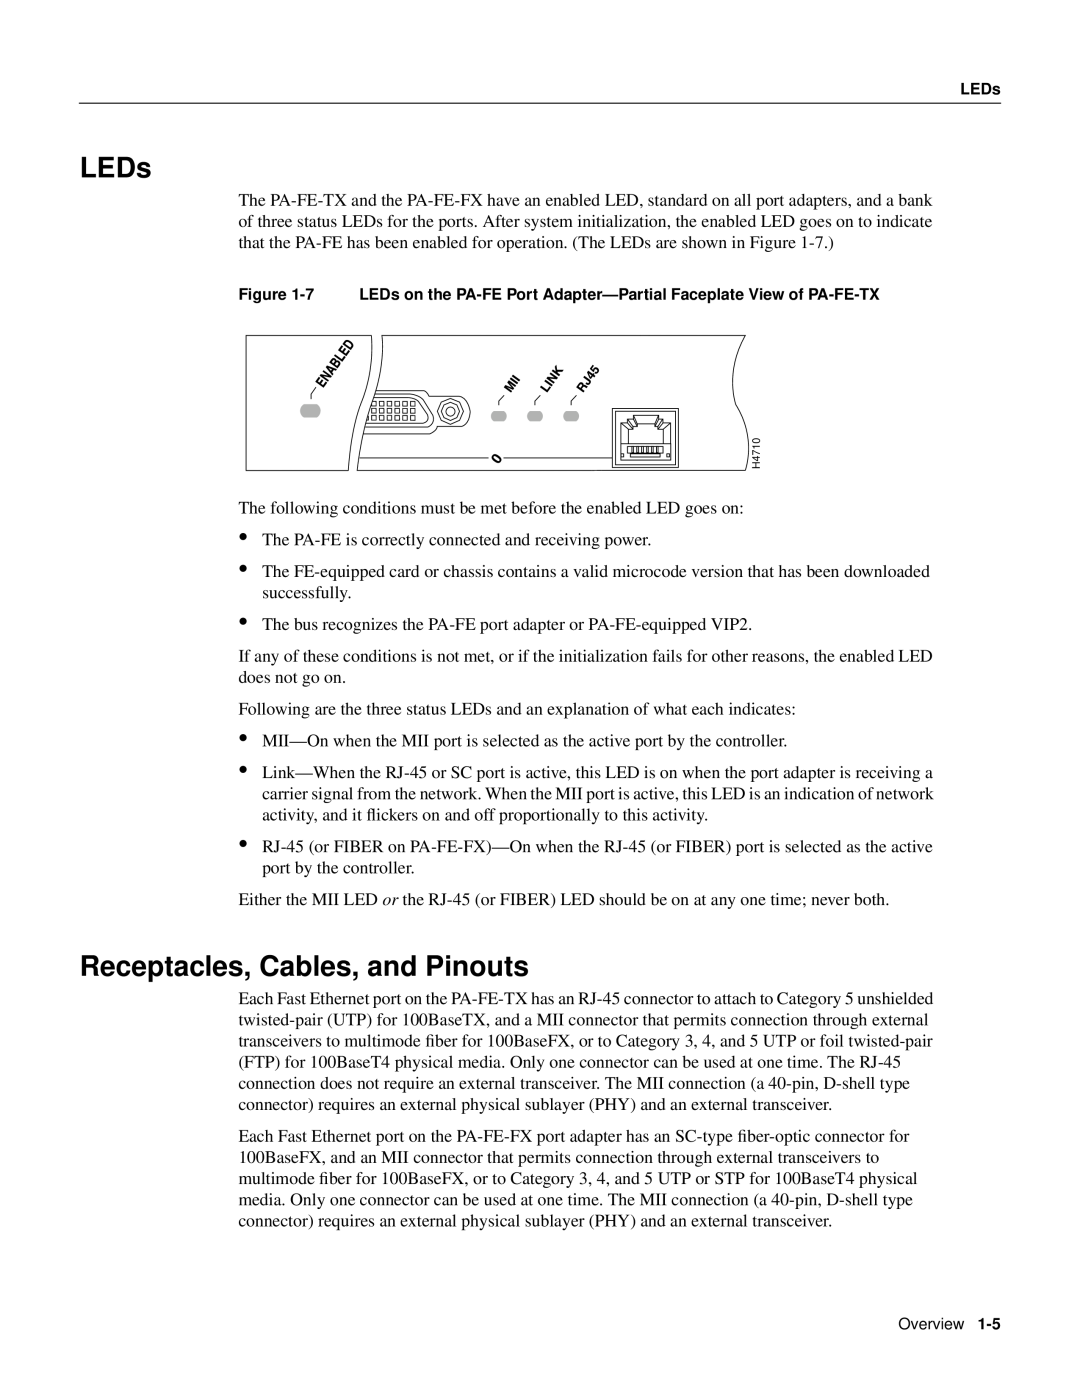 Cisco Systems PA-FE-FX, PA-FE-TX manual LEDs, Receptacles, Cables, and Pinouts 